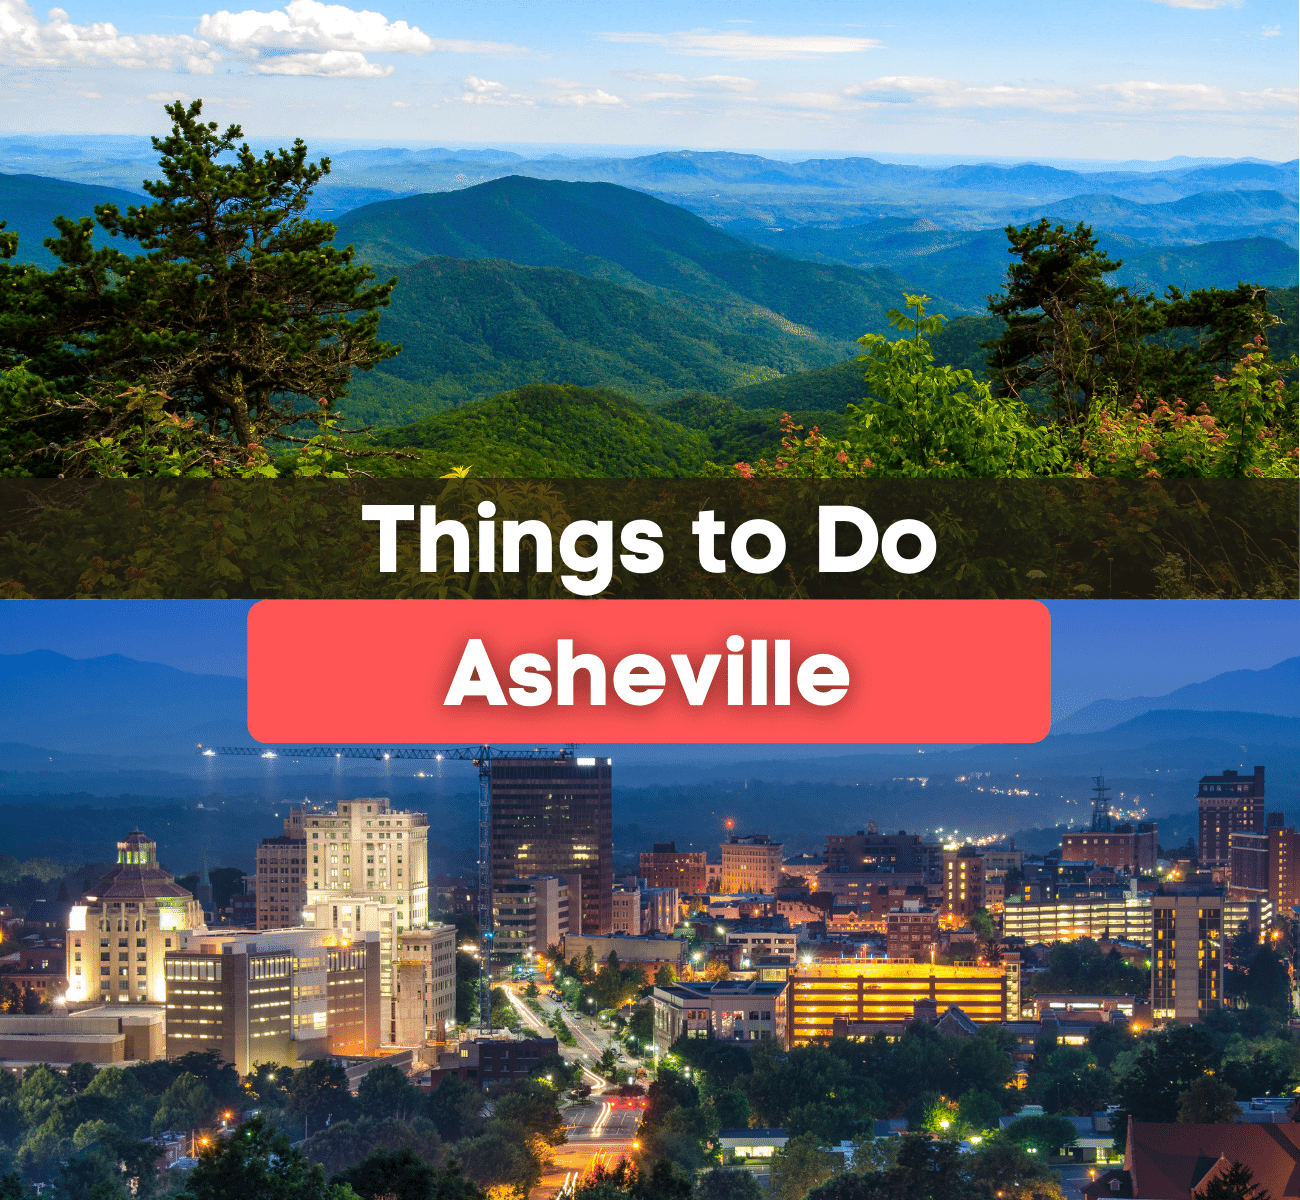 Things to do in Asheville NC - Here's how to spend a day in Asheville